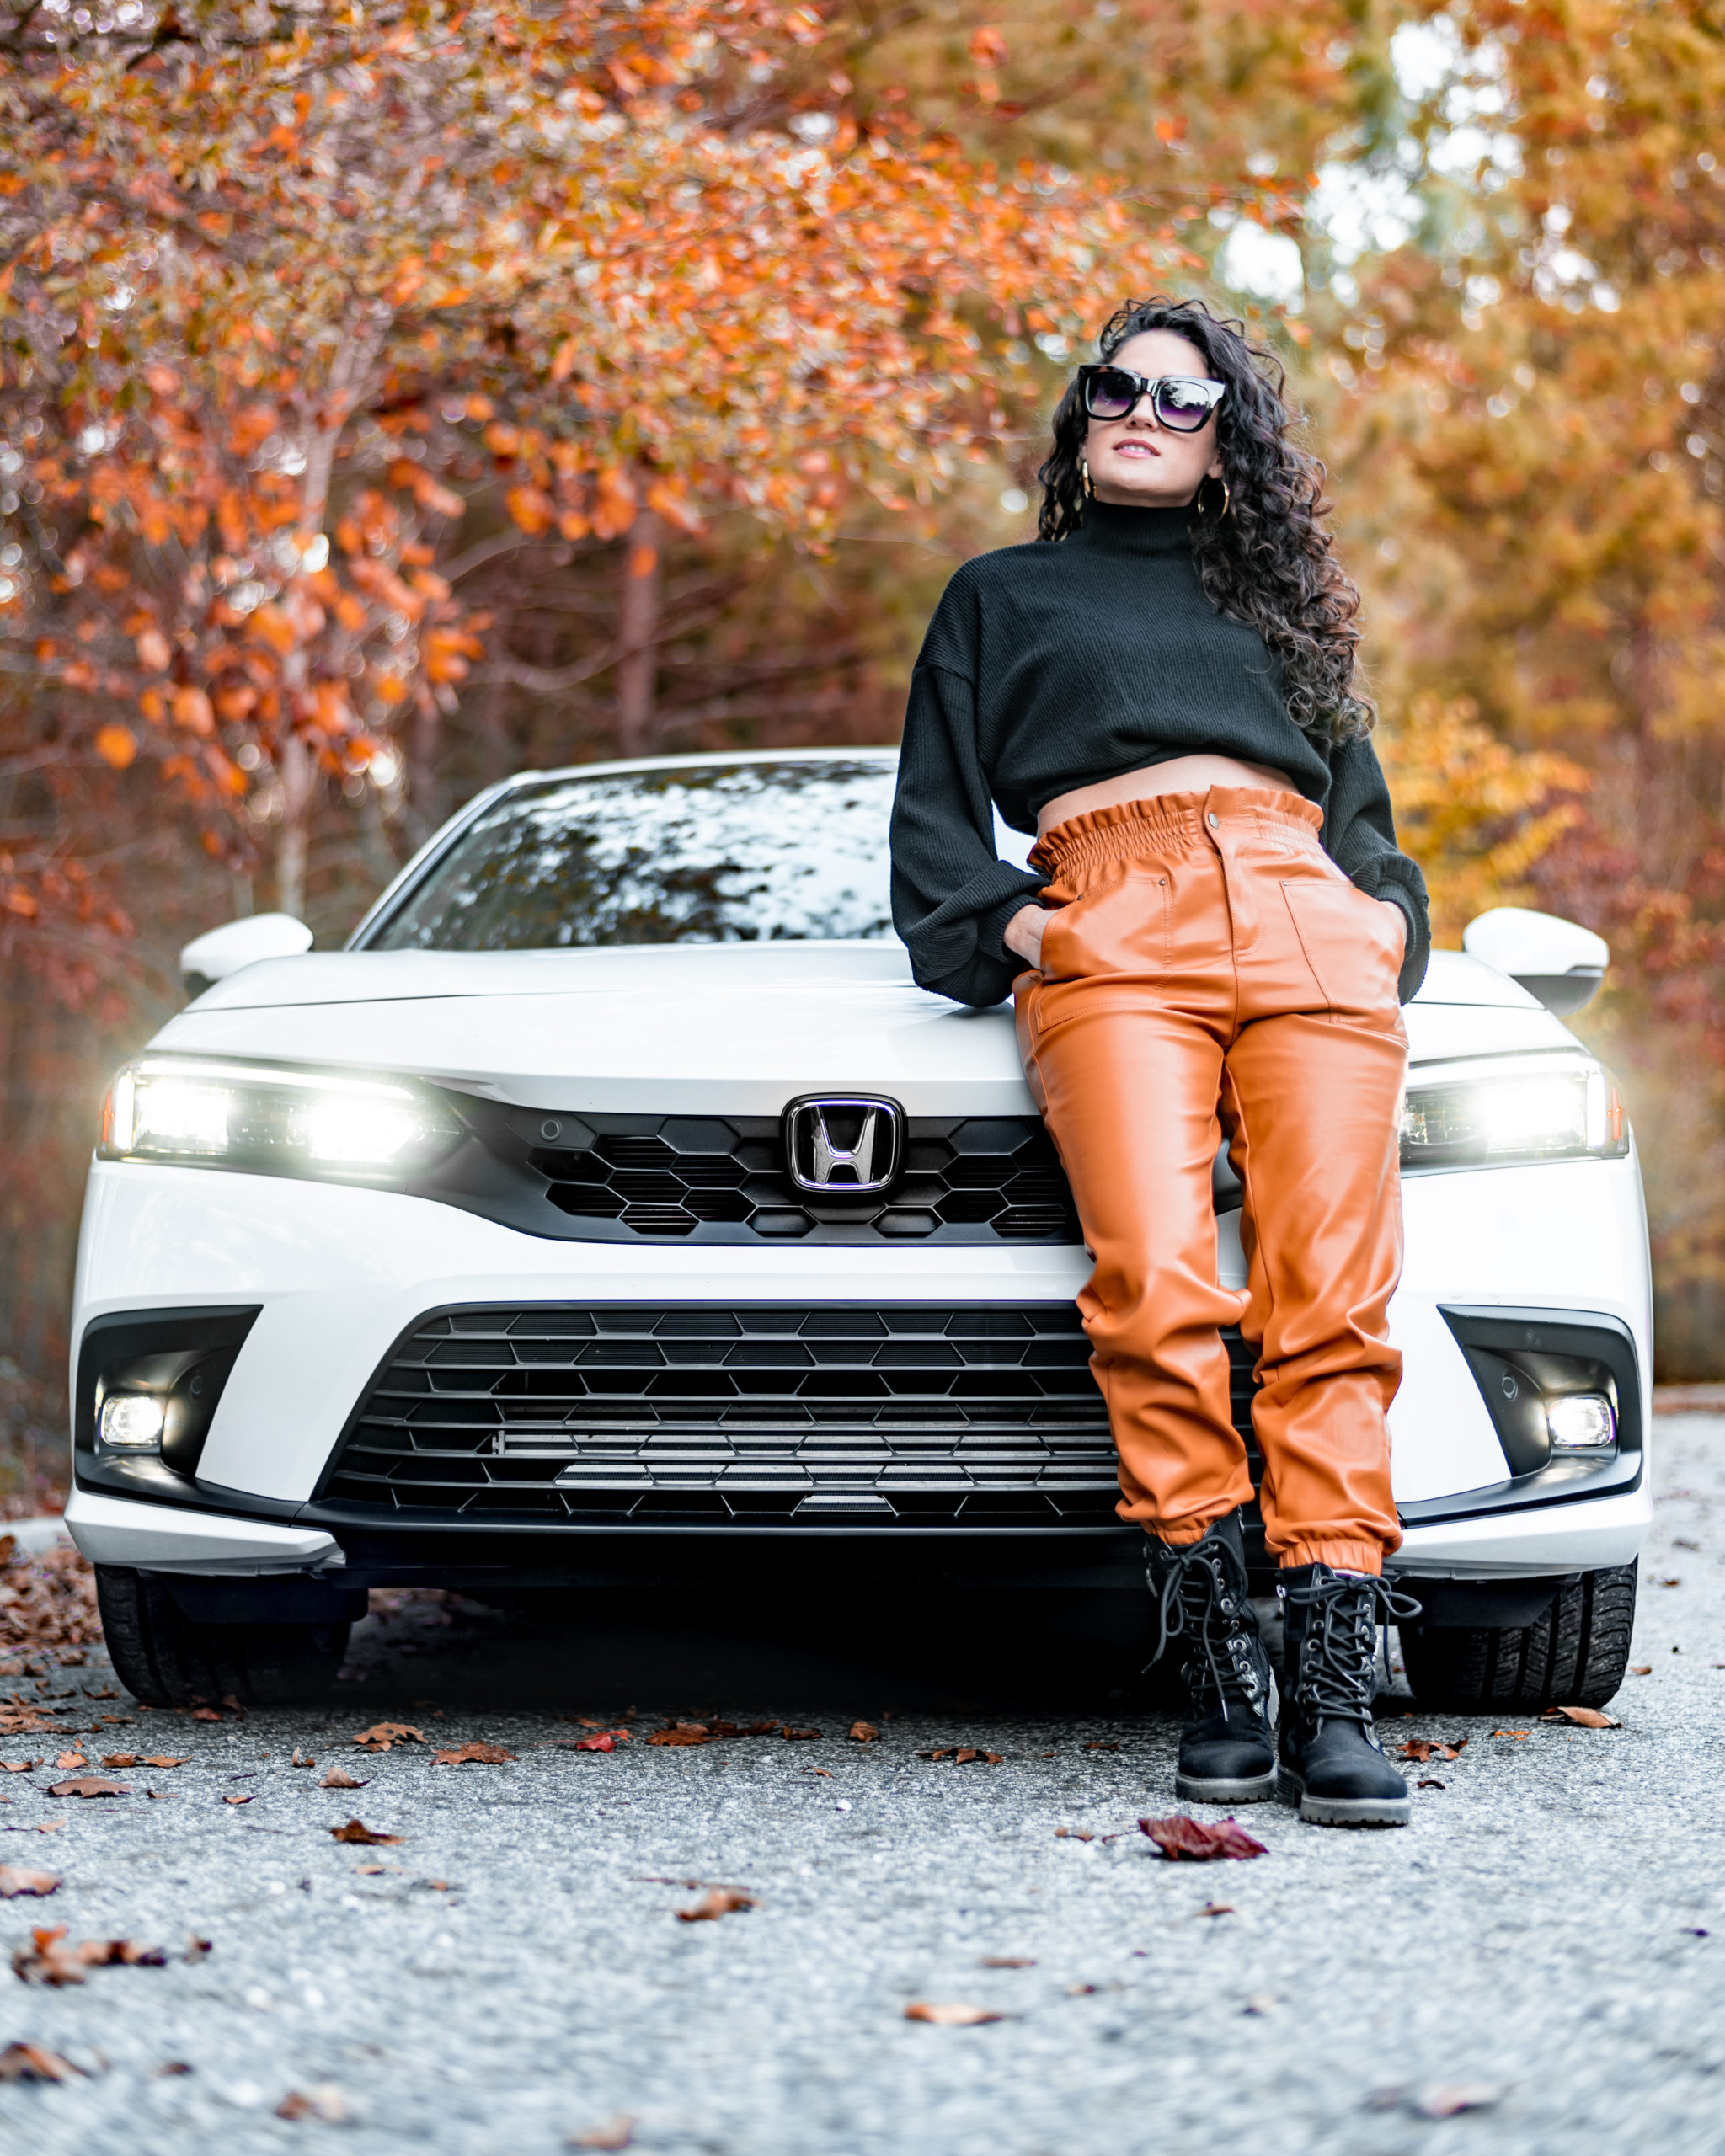 2022 Honda Civic Sport Touring, New Honda Civic, Features of the New honda Civic, Best sporty affordable cars, best style and travel bloggers, top atlanta bloggers, Erica Valentin, Wander in Color Blog, Faux leather joggers, fall outfit ideas, fall outfit inspo, 2021 fall trends, how to style combat boots, how to style faux leather joggers, how to purchase a new car in 2021, car buying process